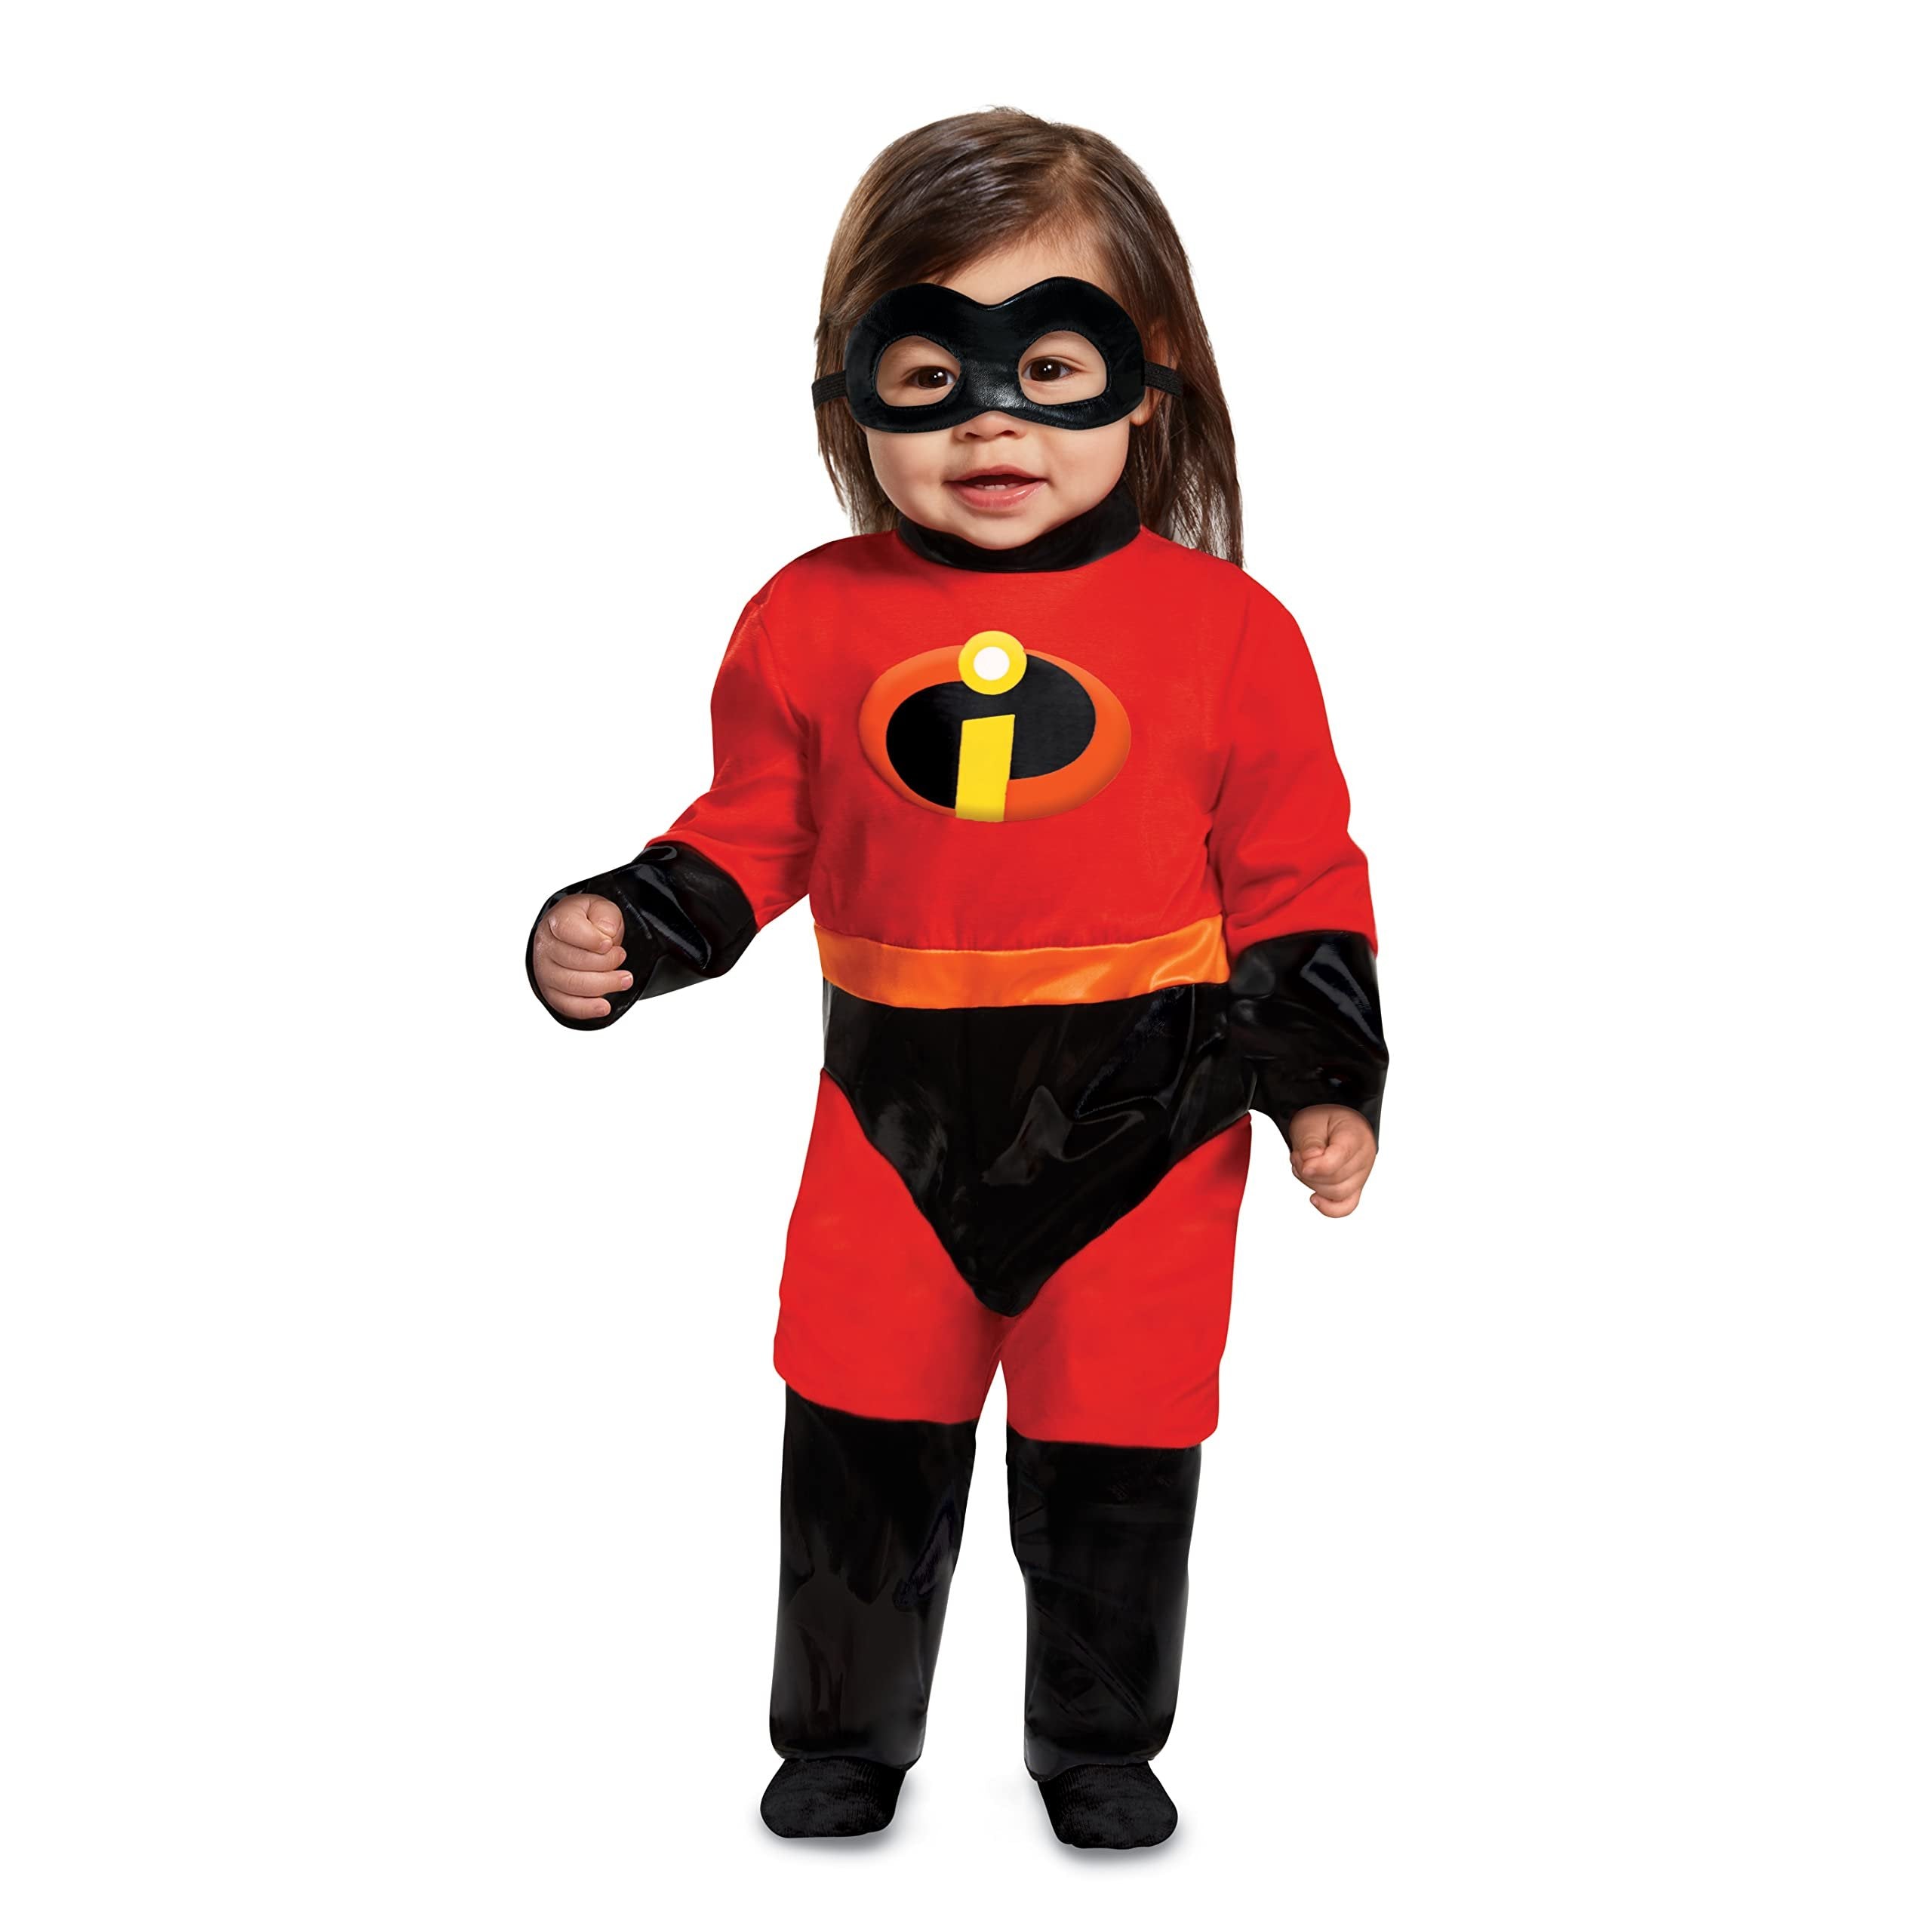 Disguise Baby Incredibles Infant Classic Costume, red, (12-18 mths)